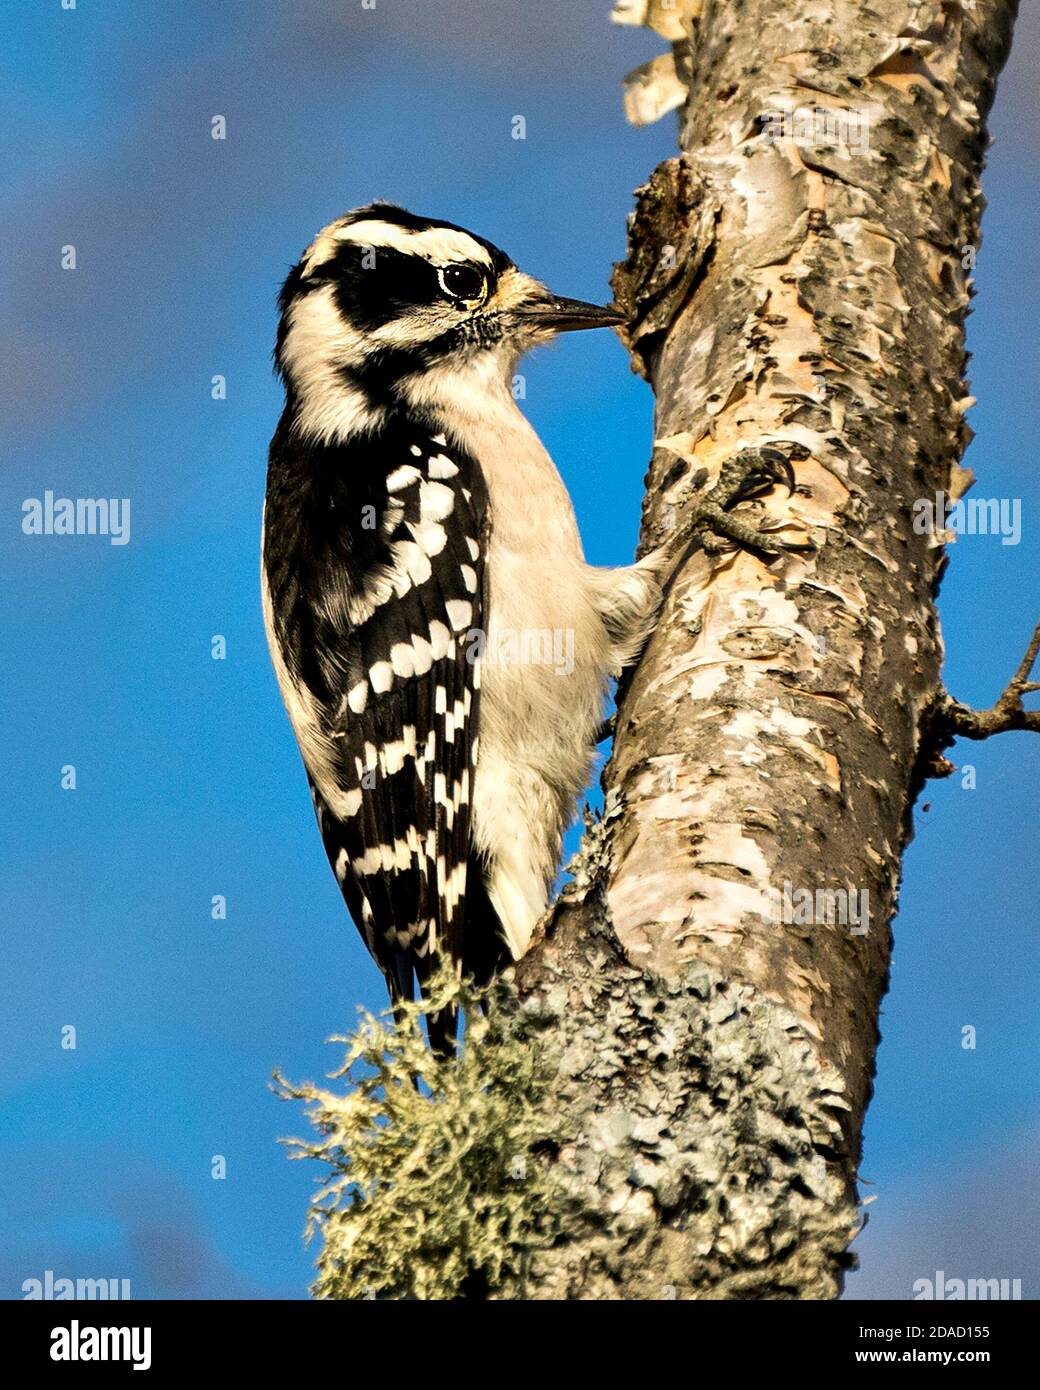 Woodpecker close up profile view on a yellow birch tree trunk with a blue sky blur background in its environment and habitat displaying white and blac Stock Photo